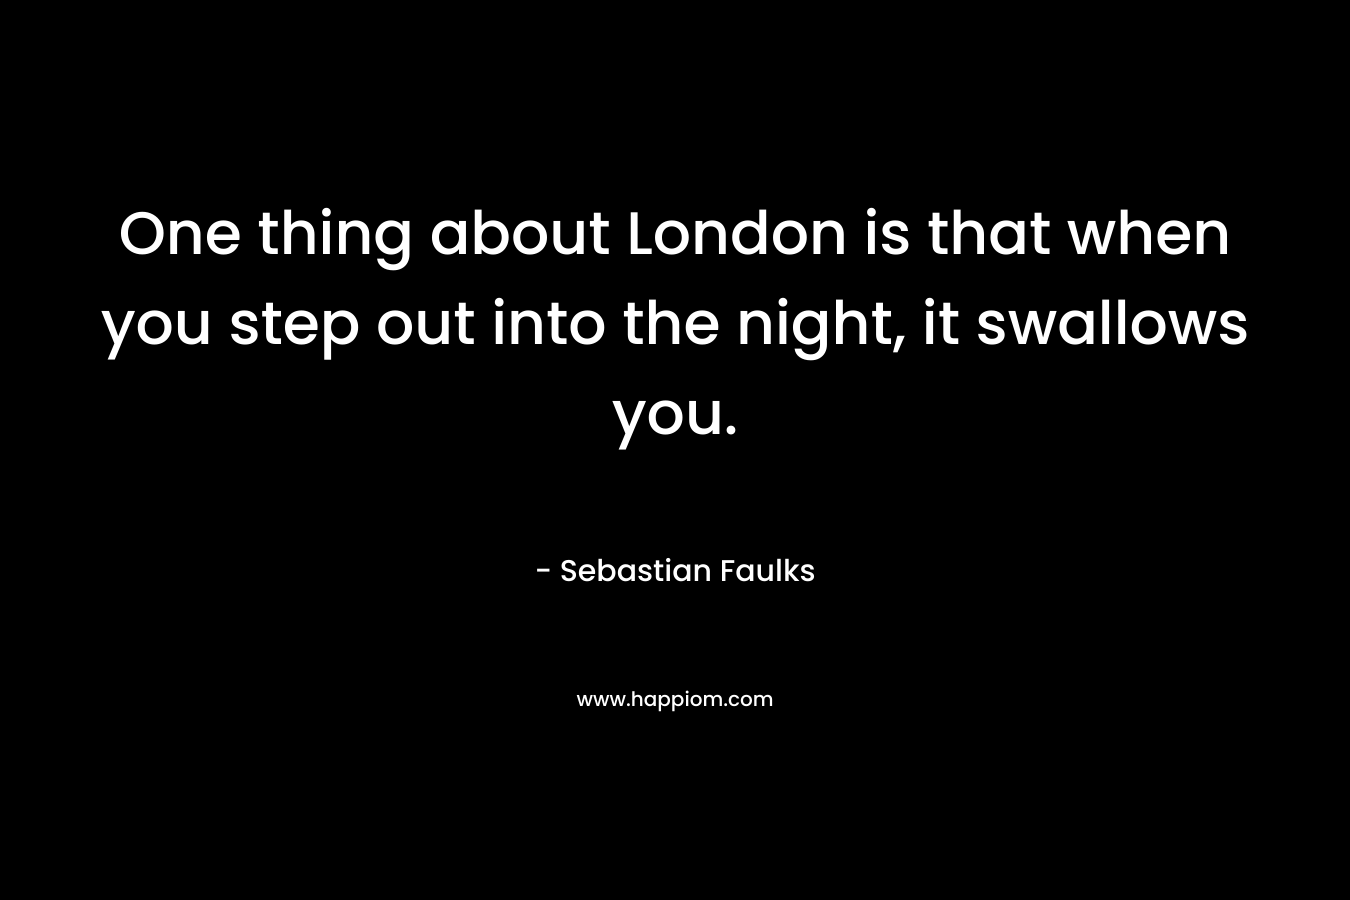 One thing about London is that when you step out into the night, it swallows you. – Sebastian Faulks